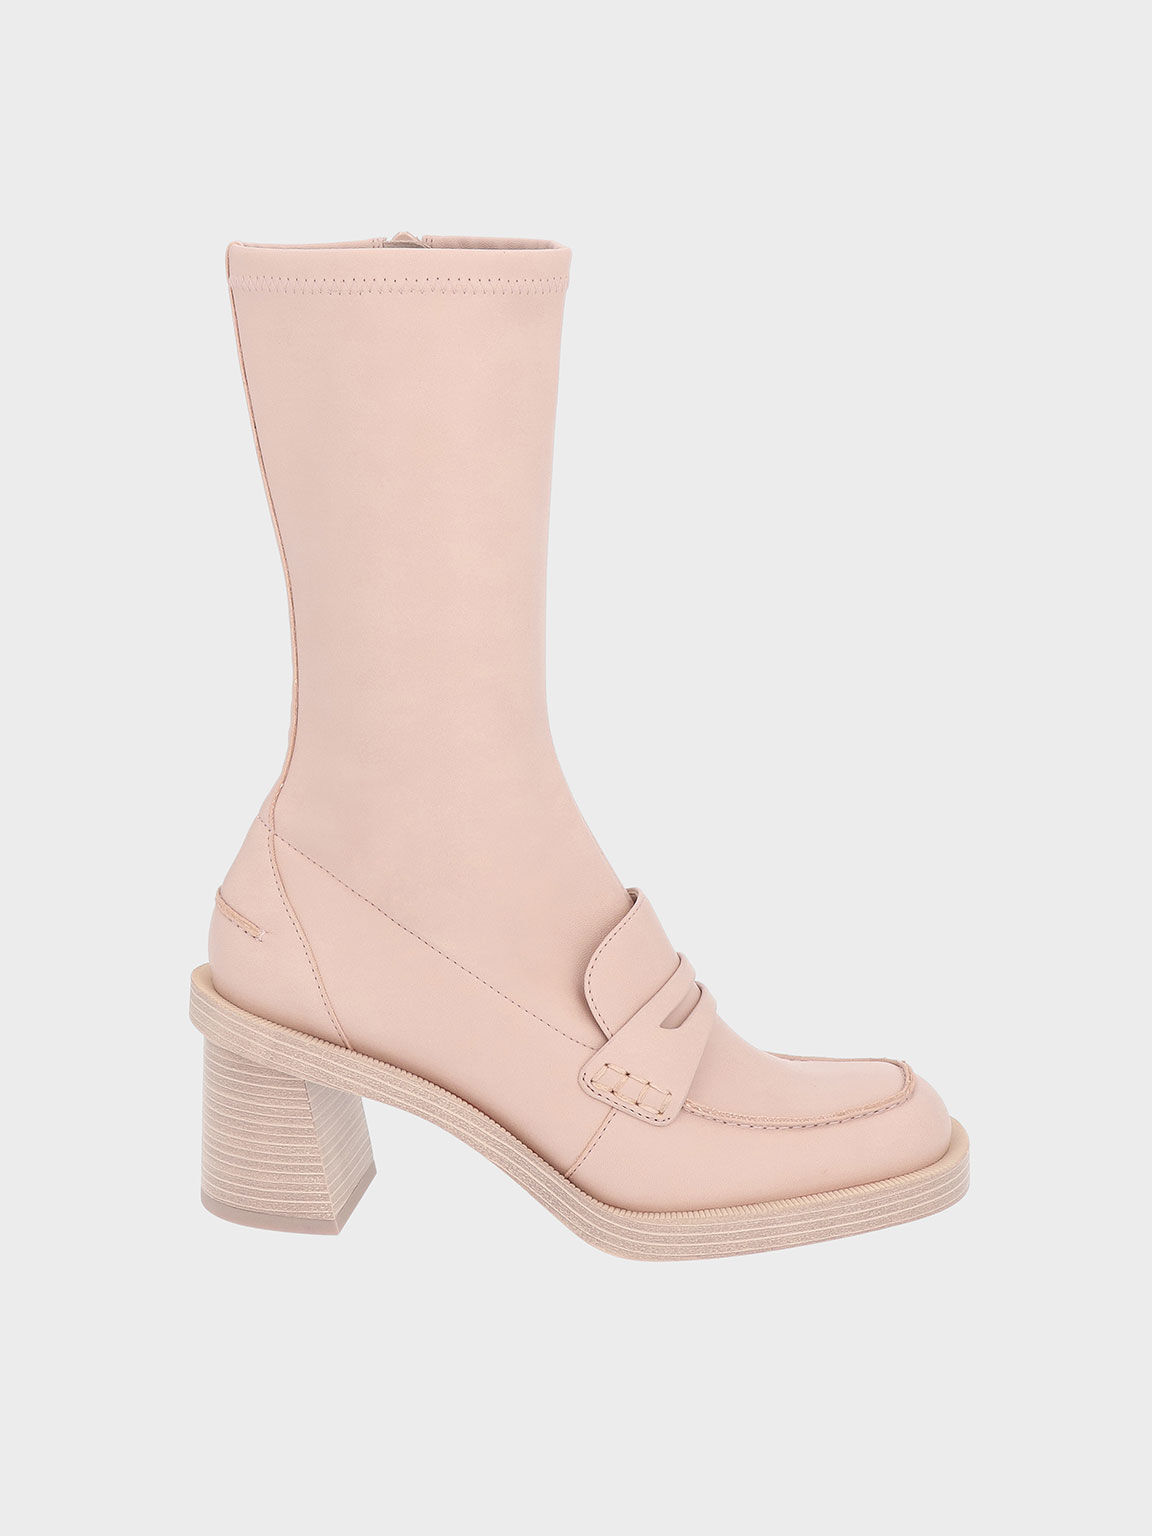 Haisley Penny Loafer Calf Boots, Pink, hi-res